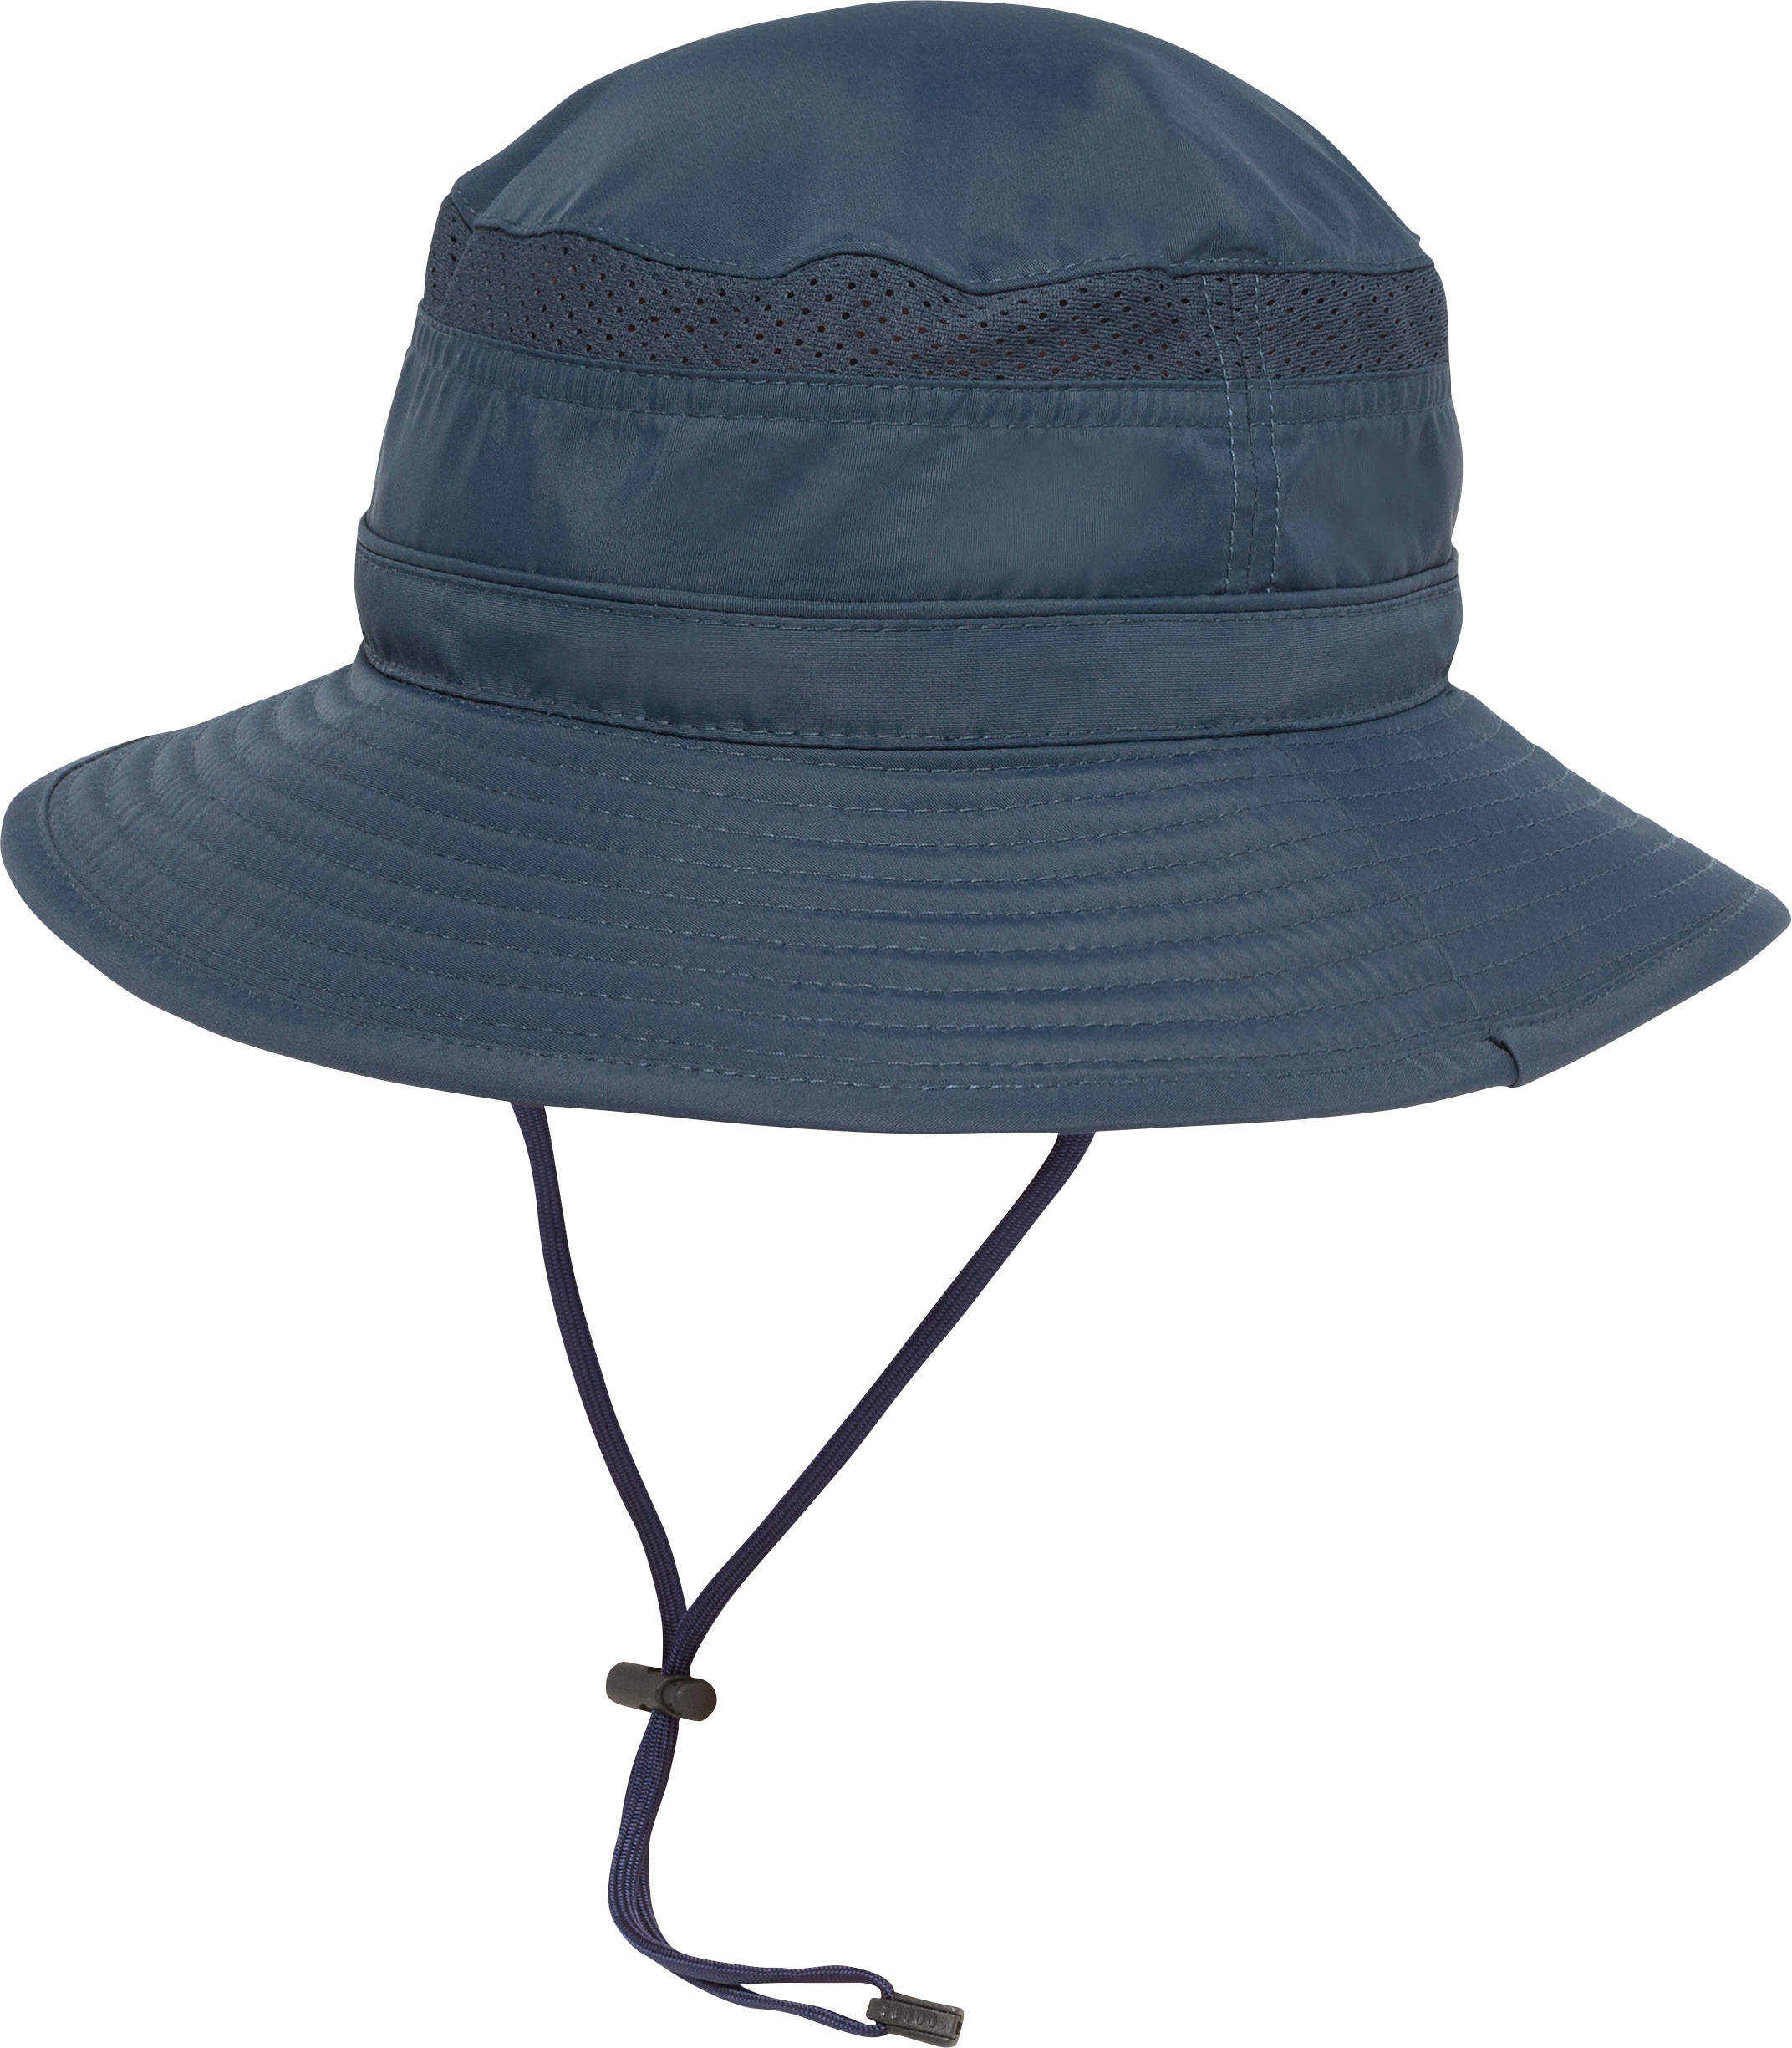 Sunday Afternoons Kids Fun Bucket Hat Captain's Navy